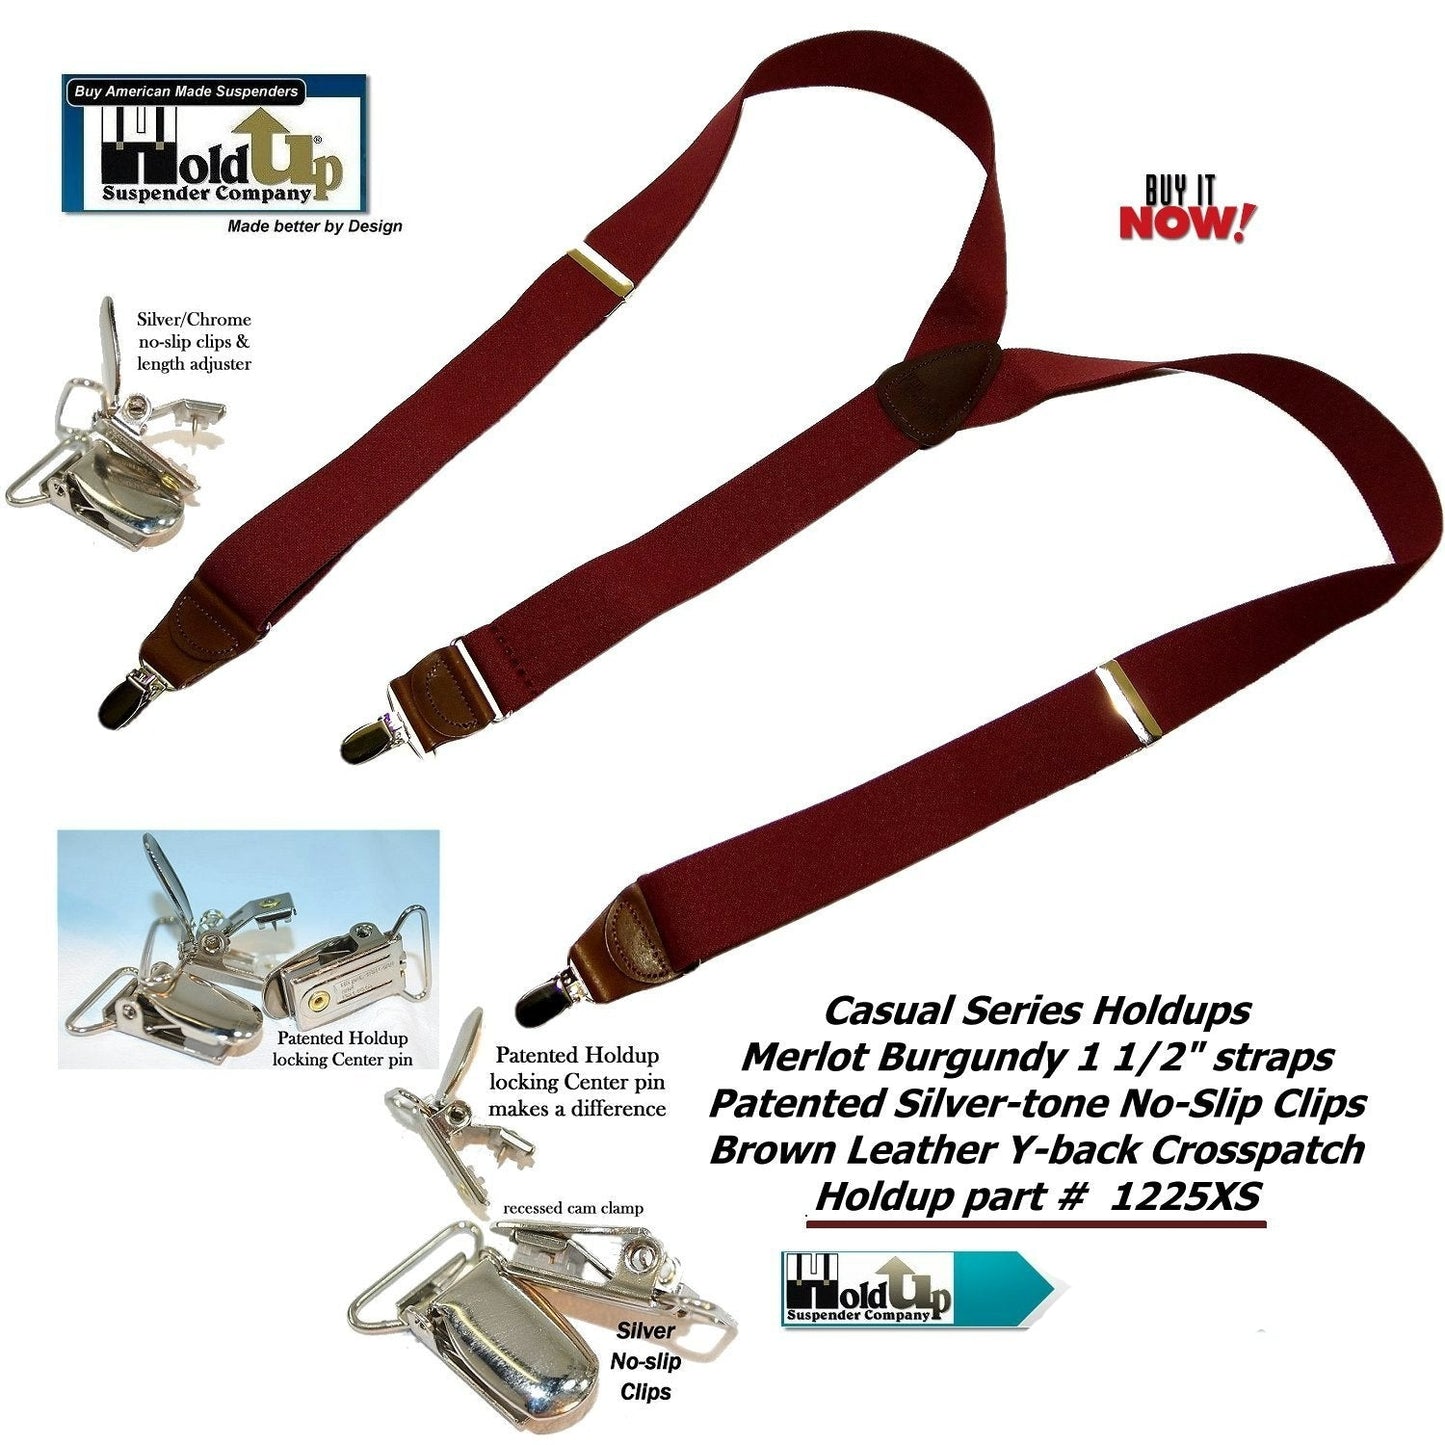 Holdup Suspender Company's deep Merlot Burgundy colored clip-on suspenders in Y-back with Patented No-slip silver-tone clips